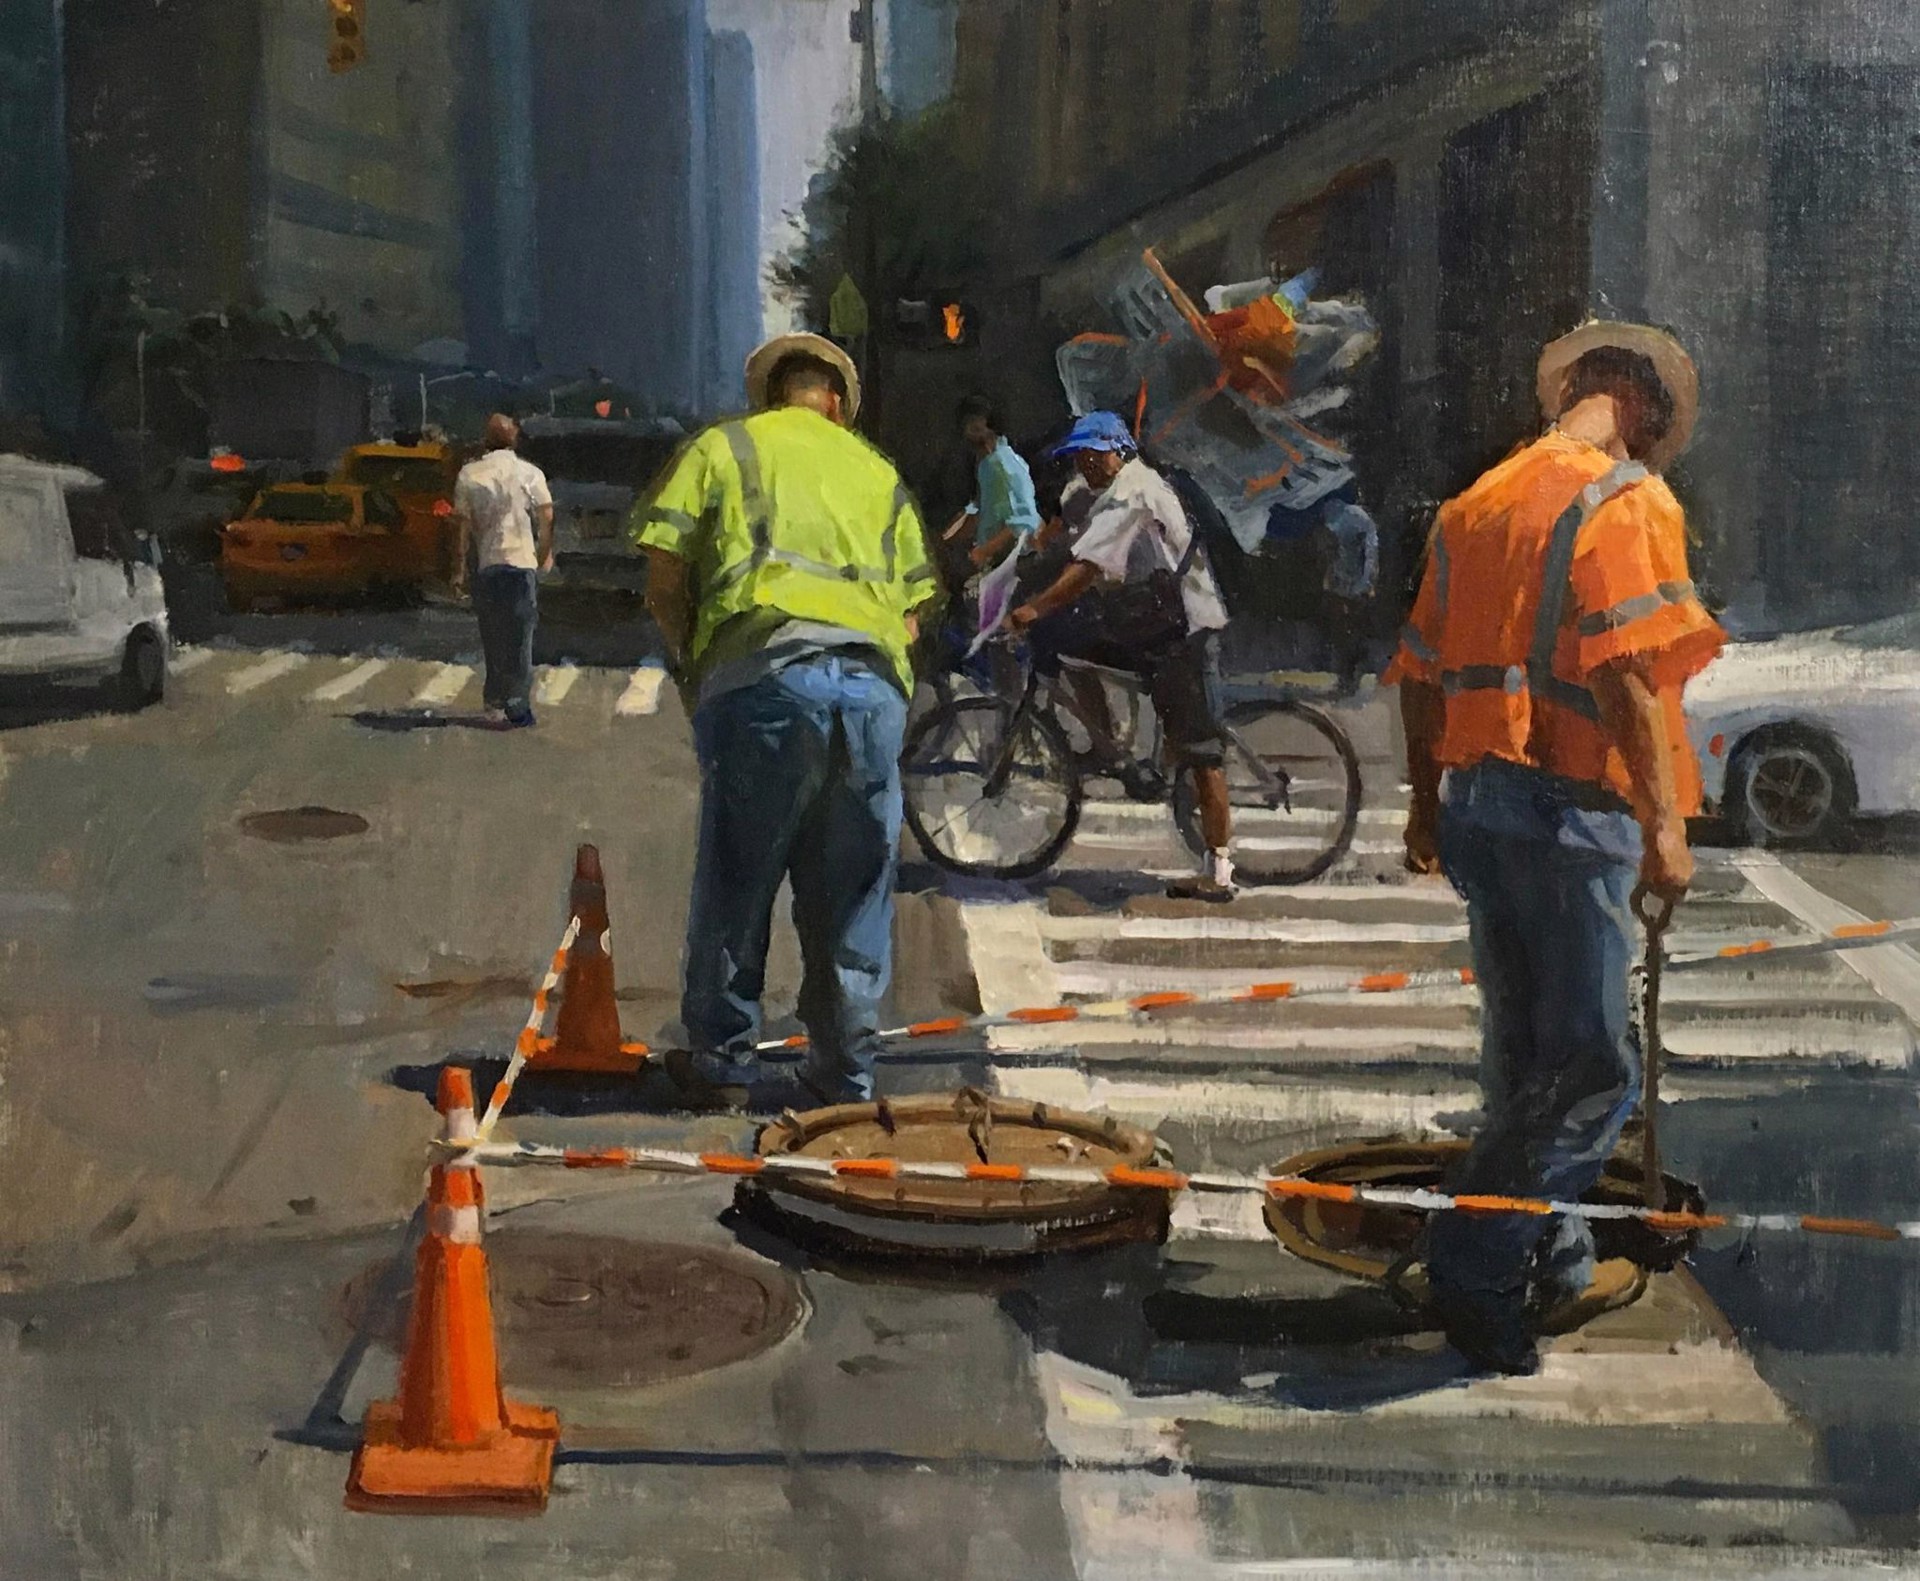 Workers in New York by Kyle Ma